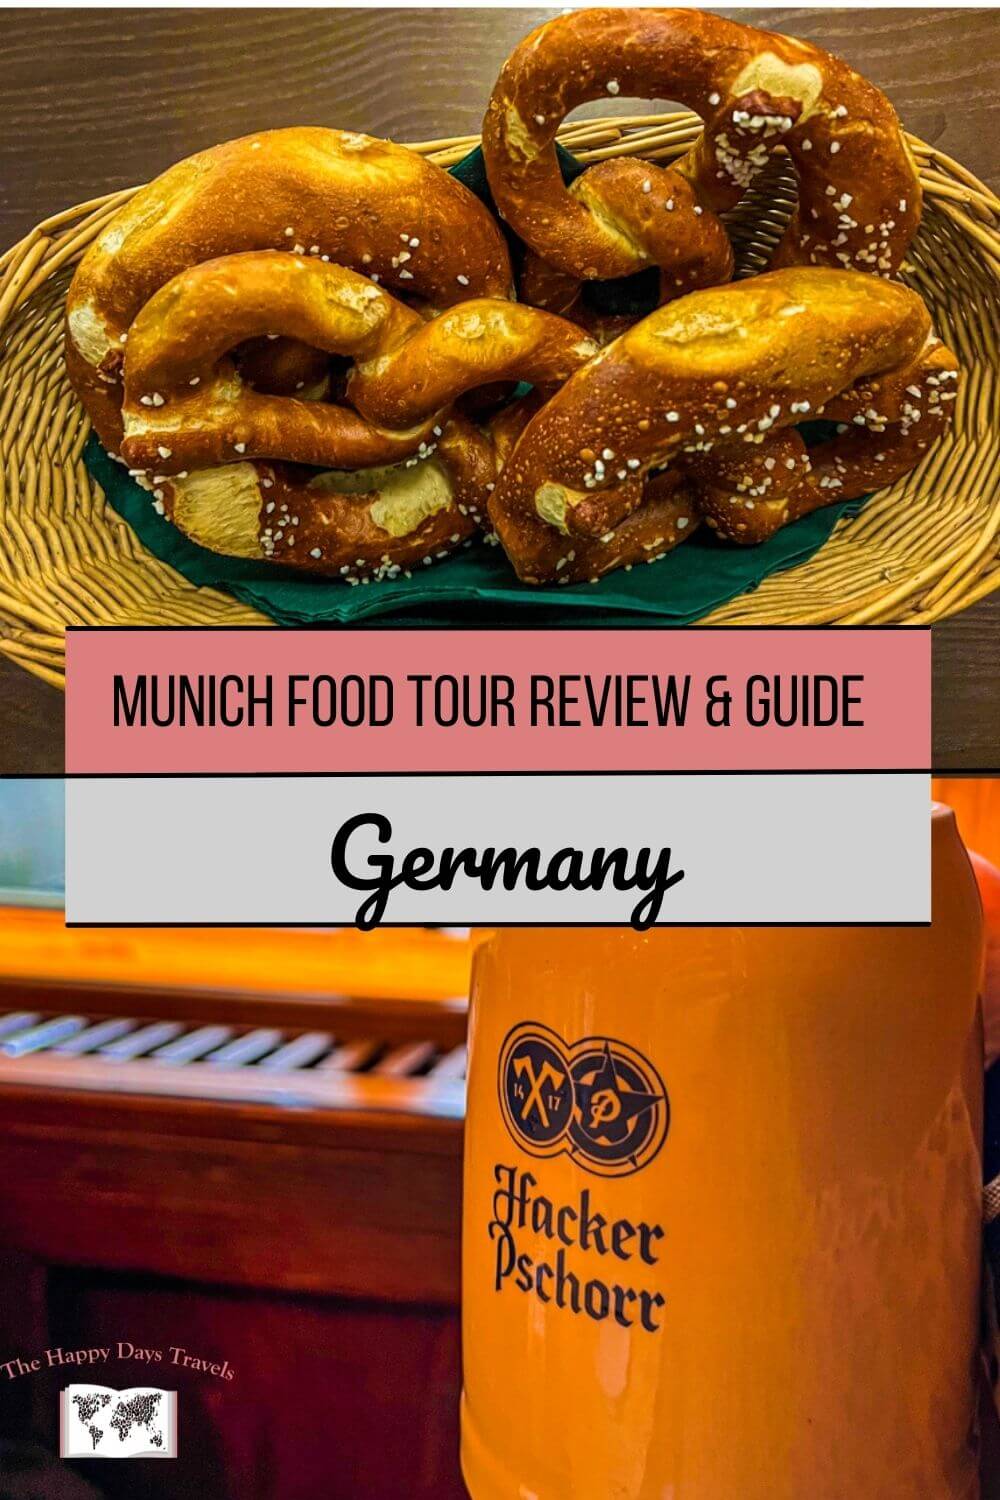 Pin Image shows two images, top is pretzels and bottom is German dark beer. Text in the middle reads Munich Food Tour Review and Guide, Germany